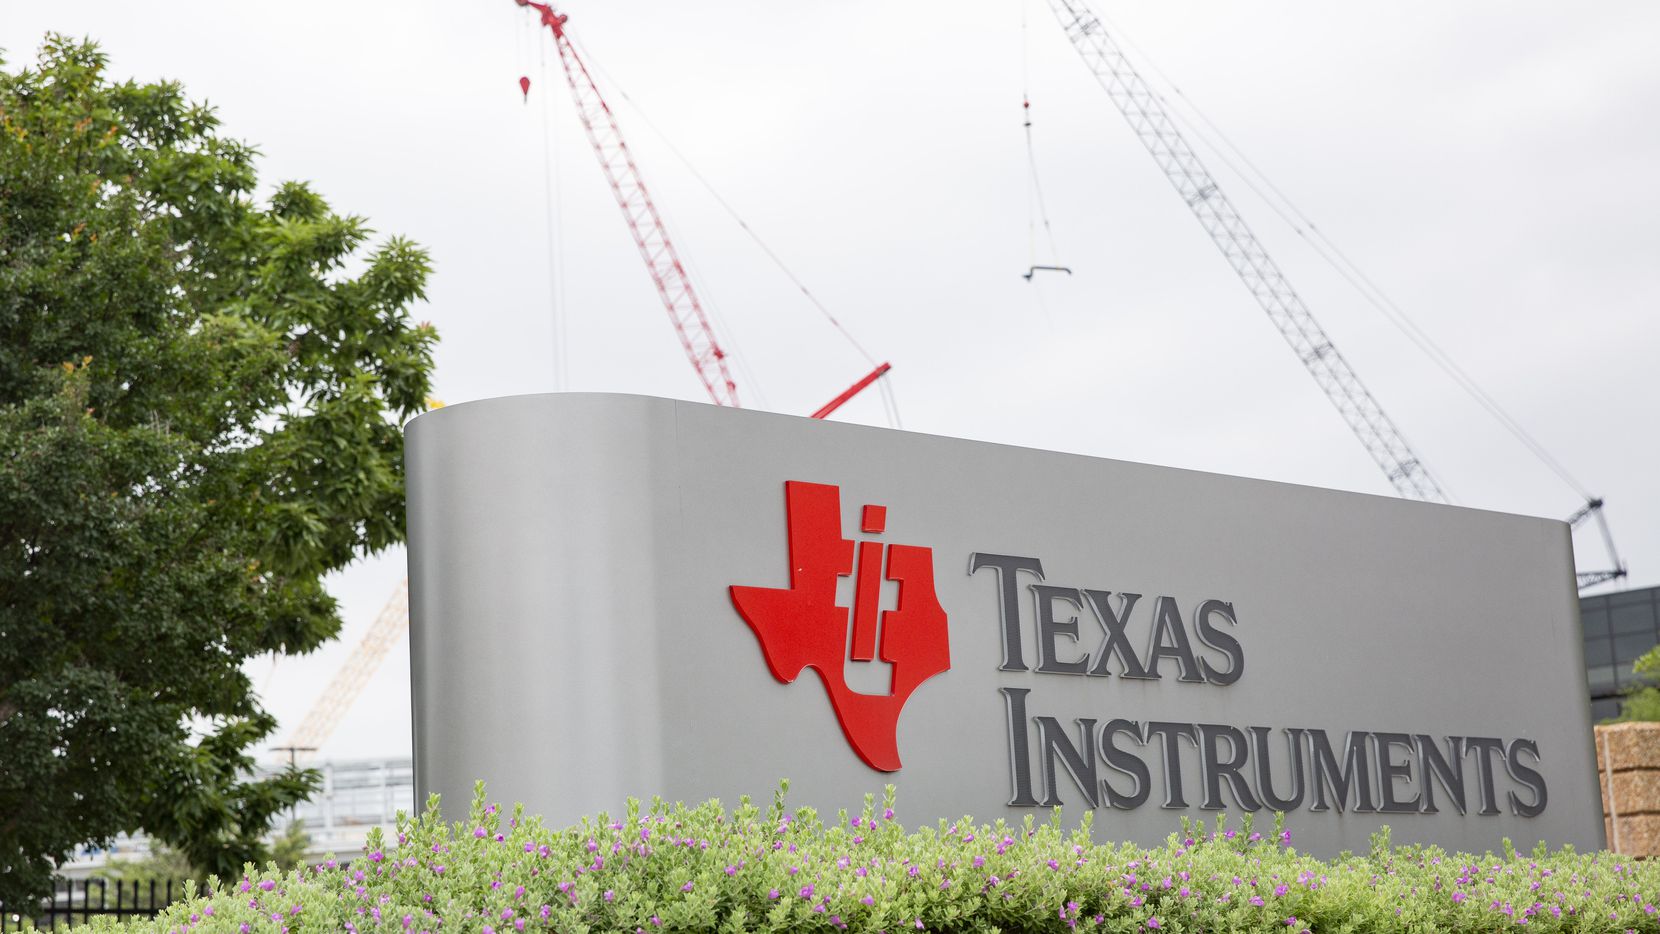 The entrance to the Texas Instruments plant In Richardson.